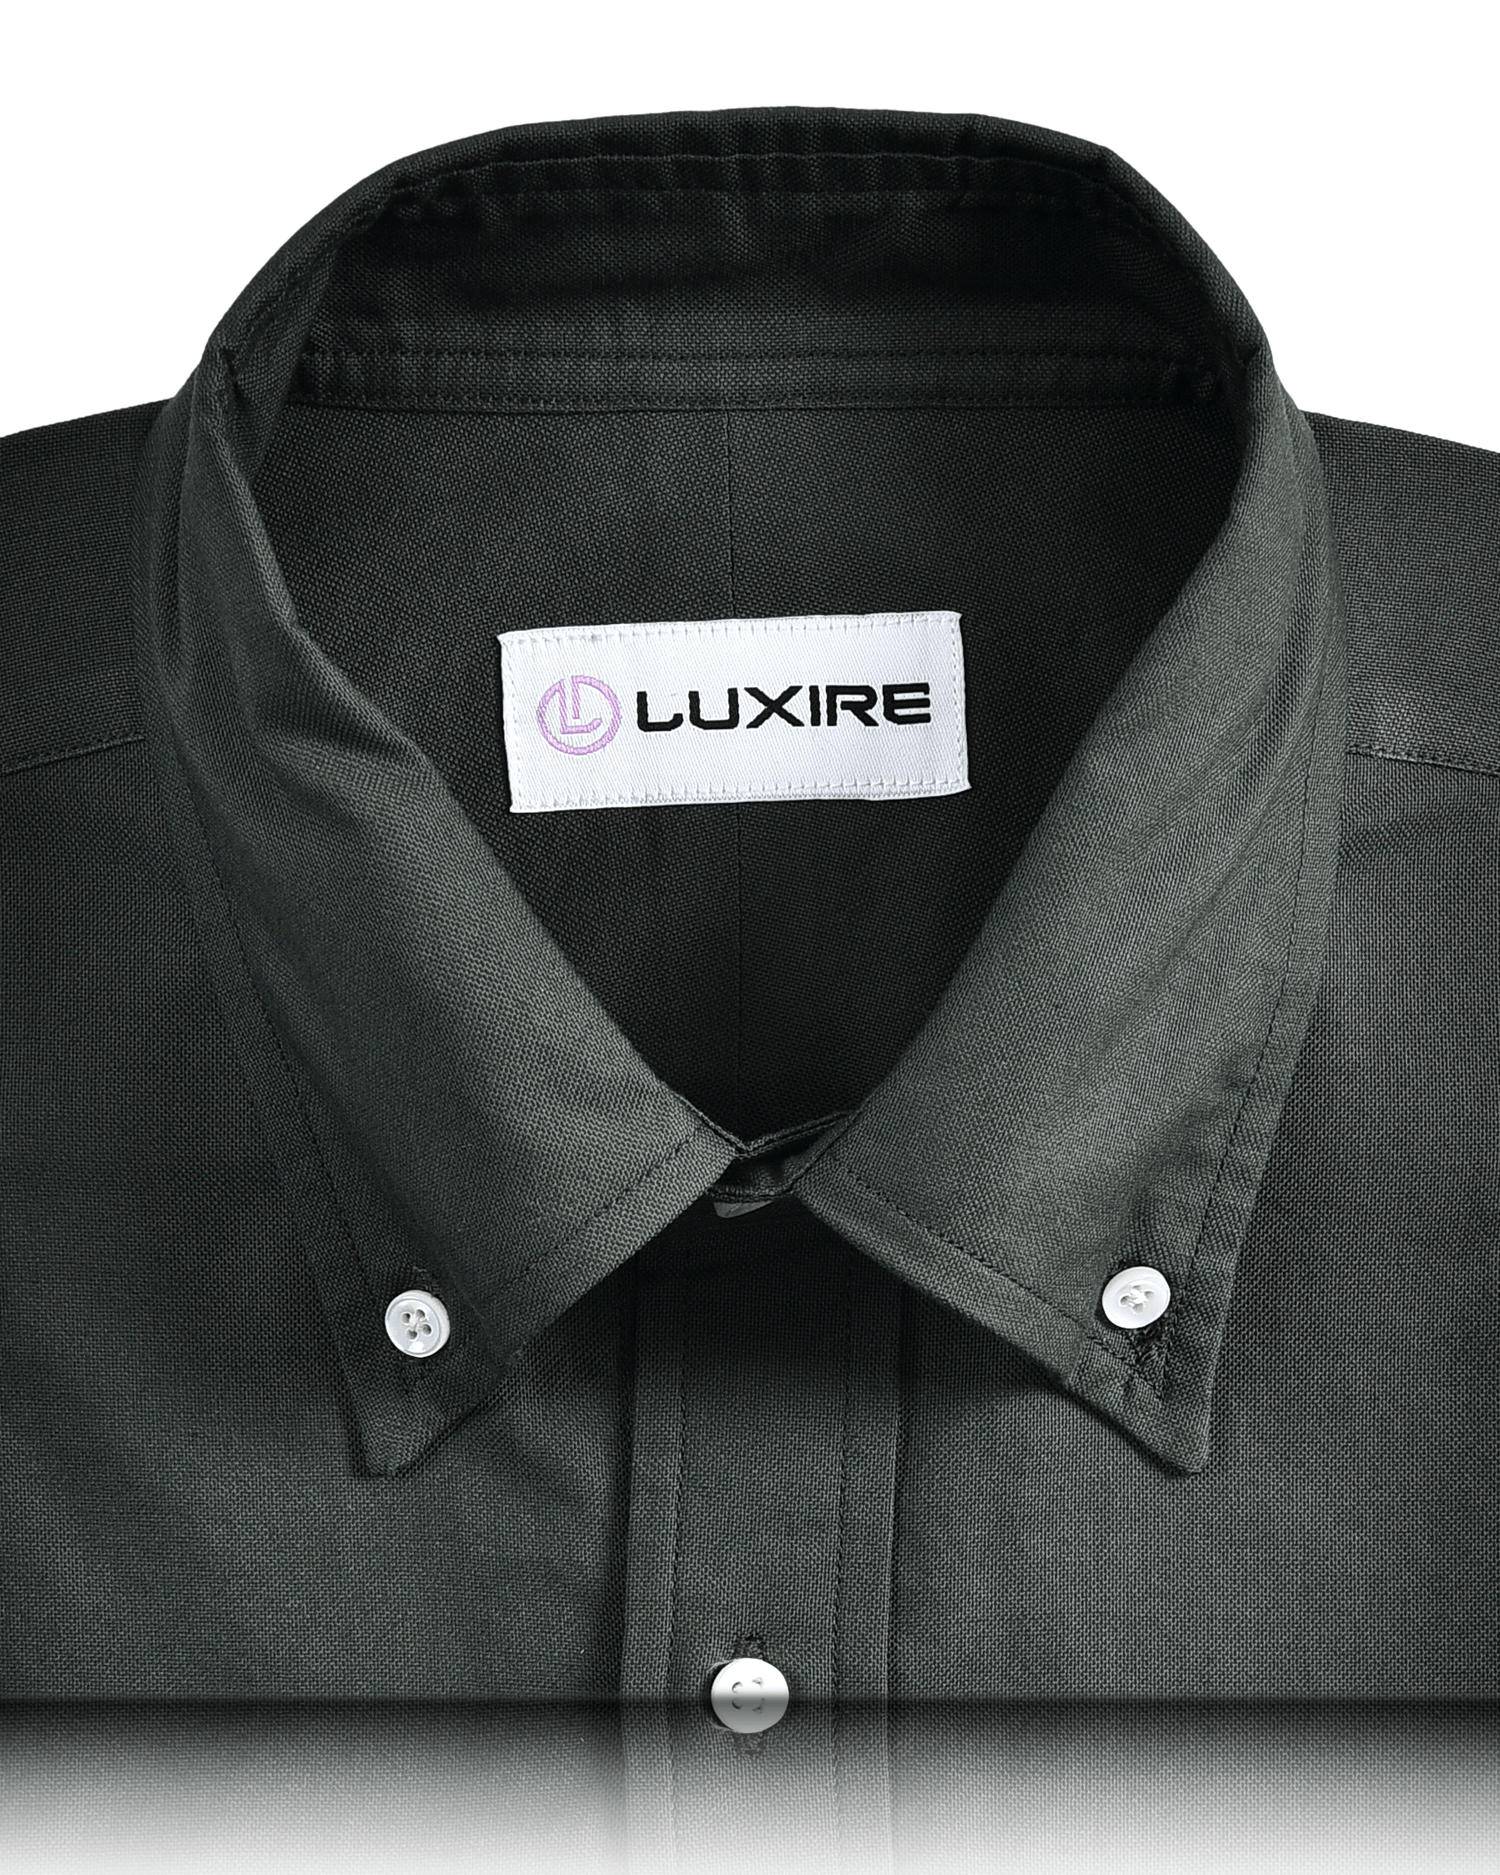 Collar of the custom oxford shirt for men by Luxire in green olive